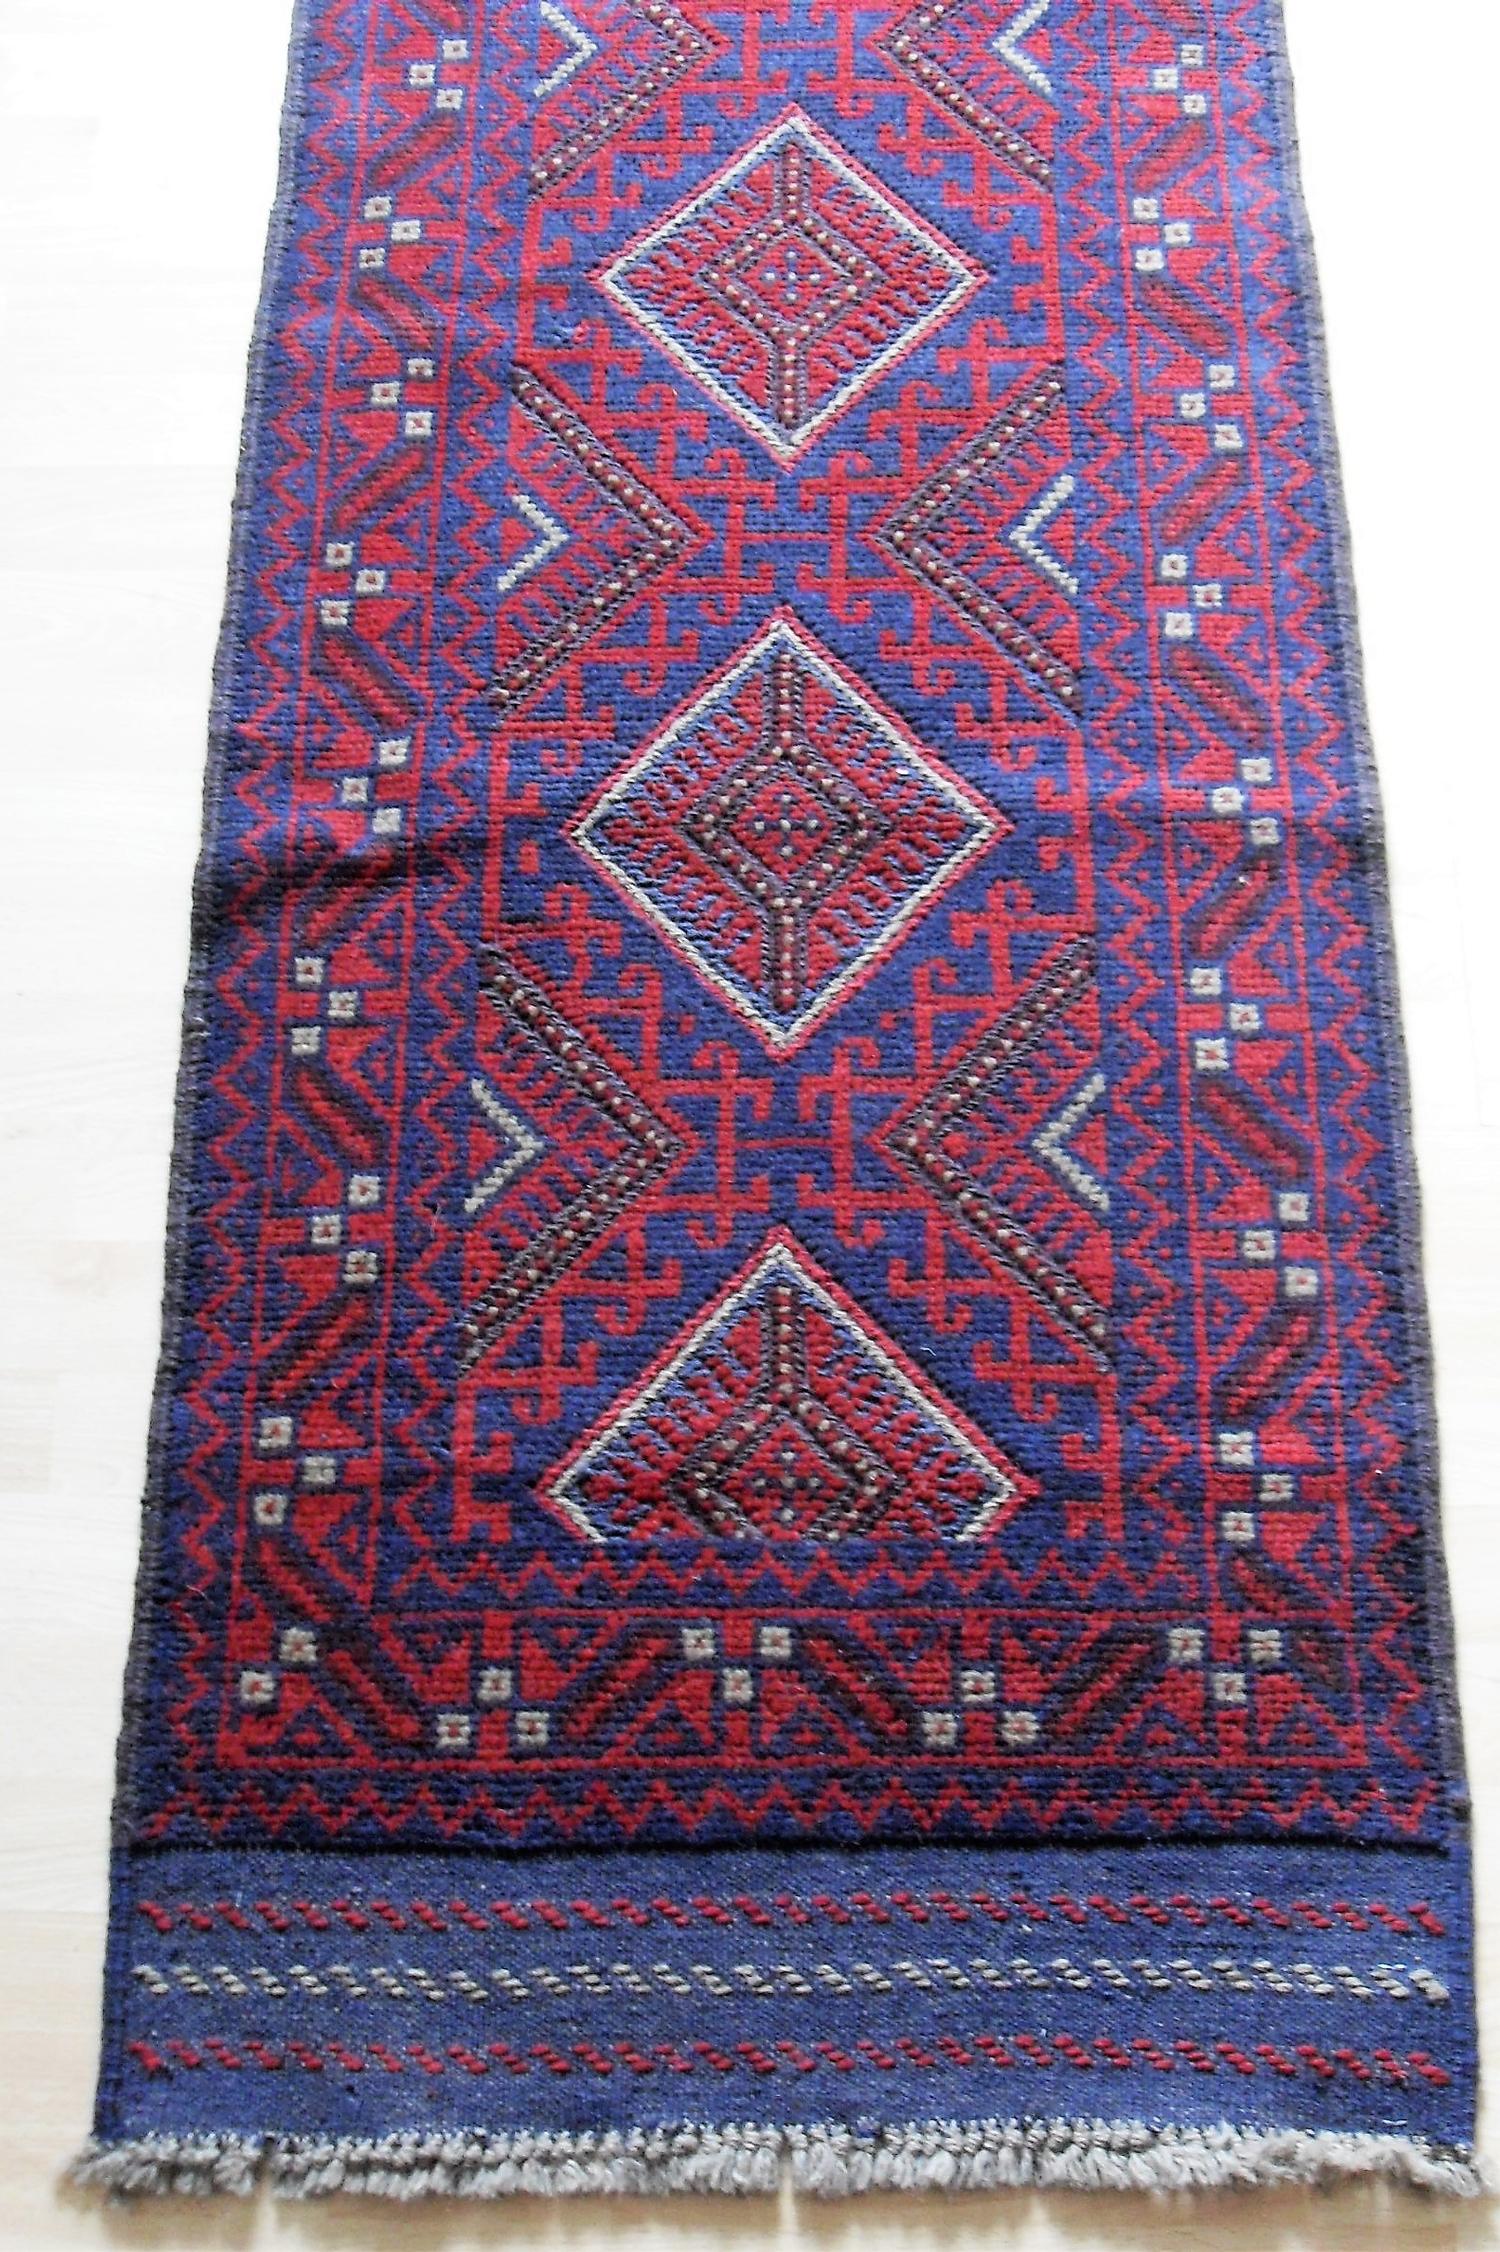 An Afghan hand-knotted burgundy-ground Meshwani wool runner with short fringe, 60 x 249 cm in good